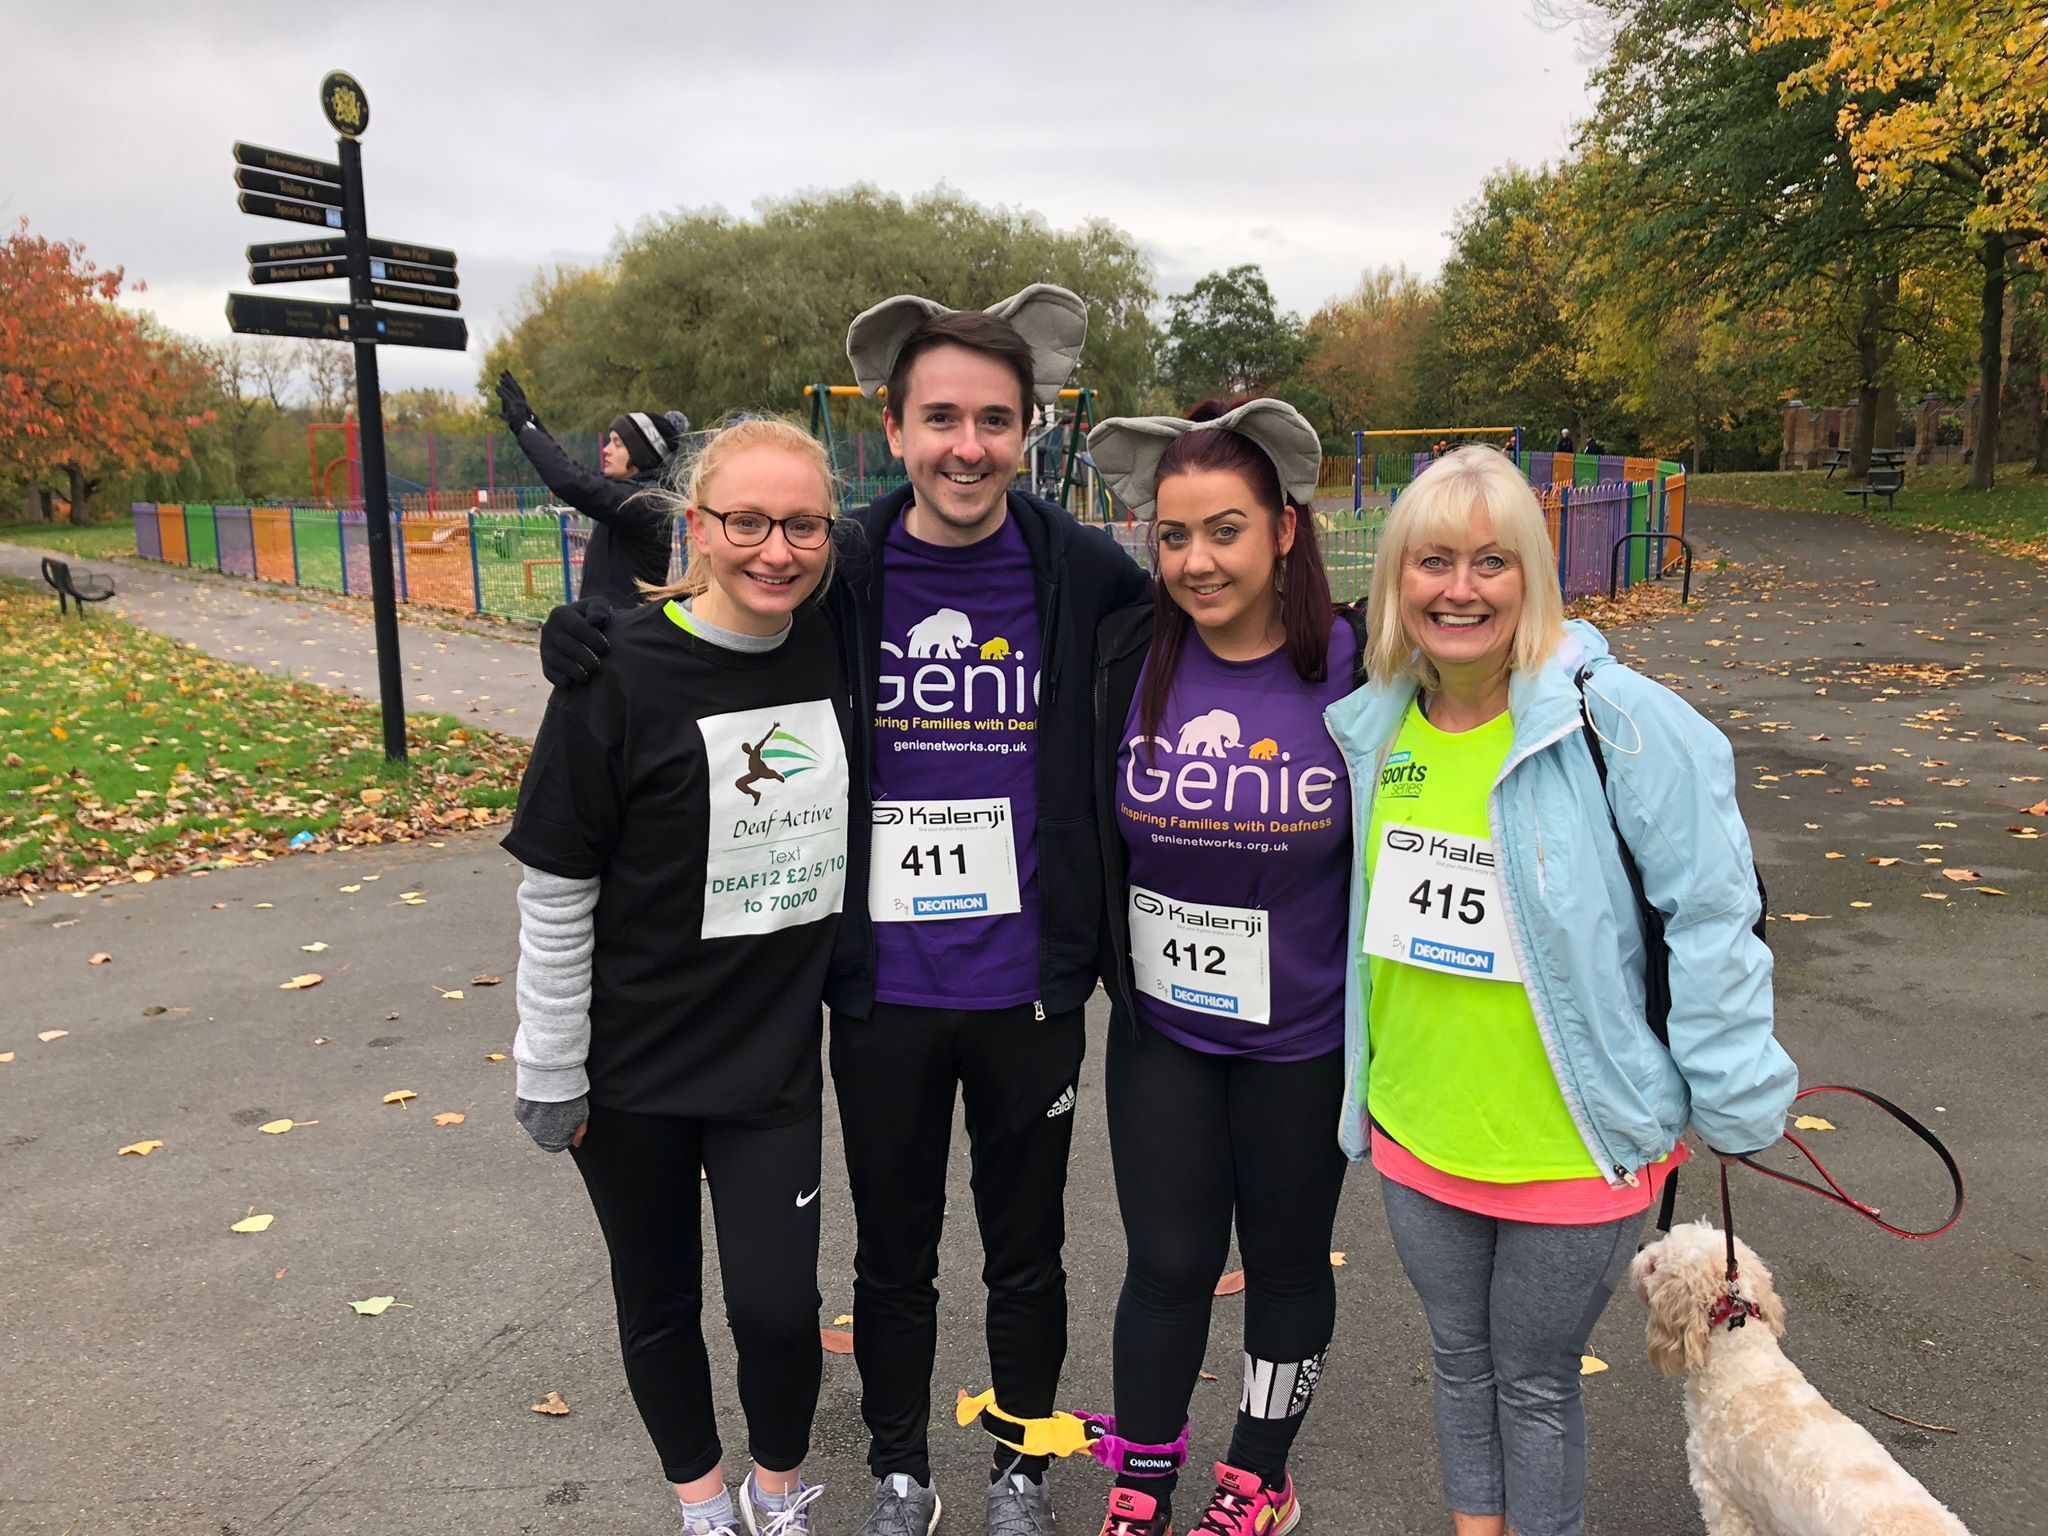 Completing the 5K charity run